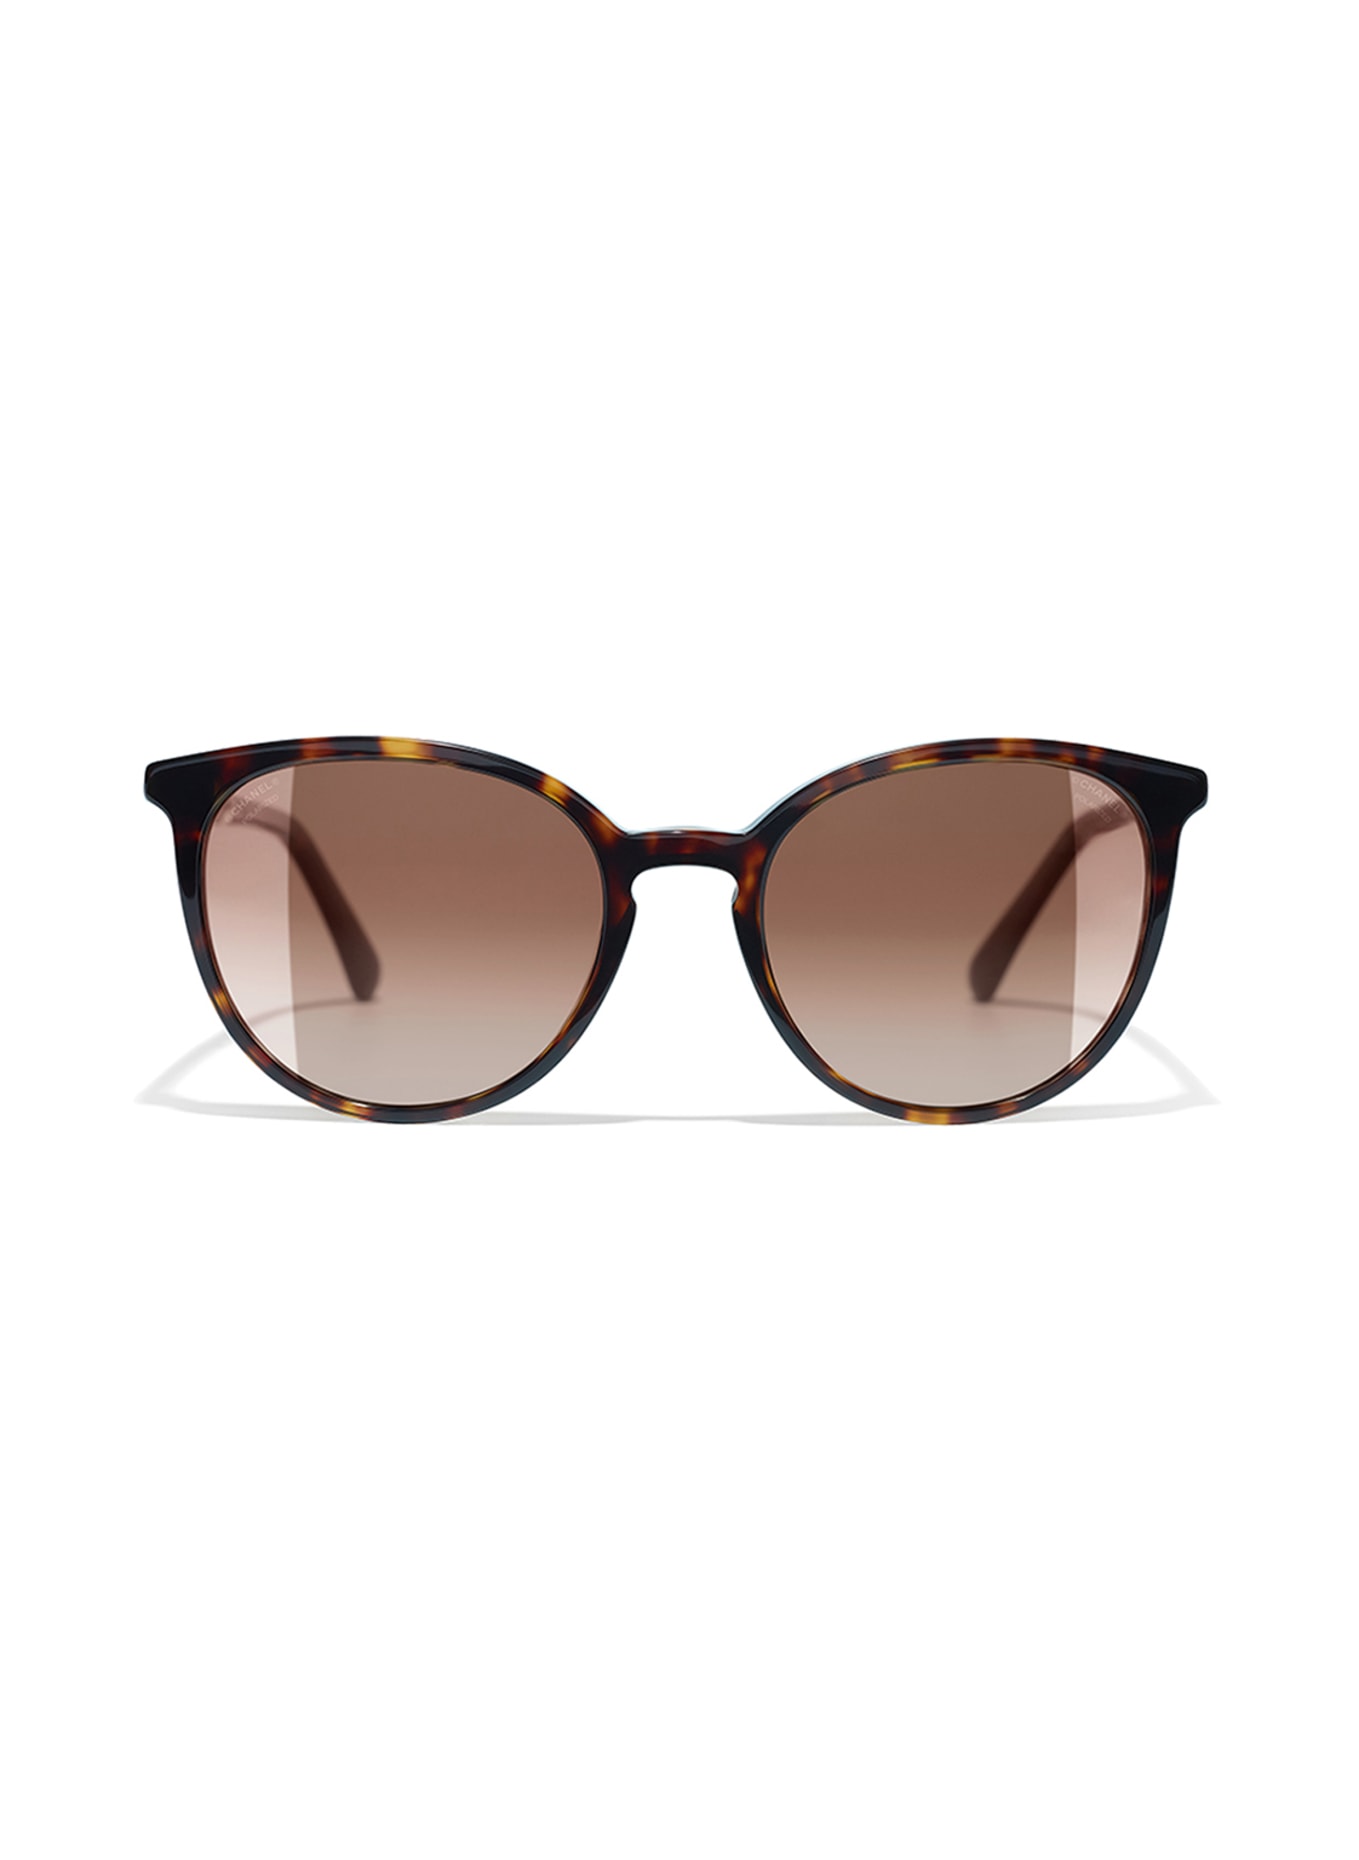 CHANEL Butterfly sunglasses, Color: C714S9 - HAVANA/BROWN (Image 2)